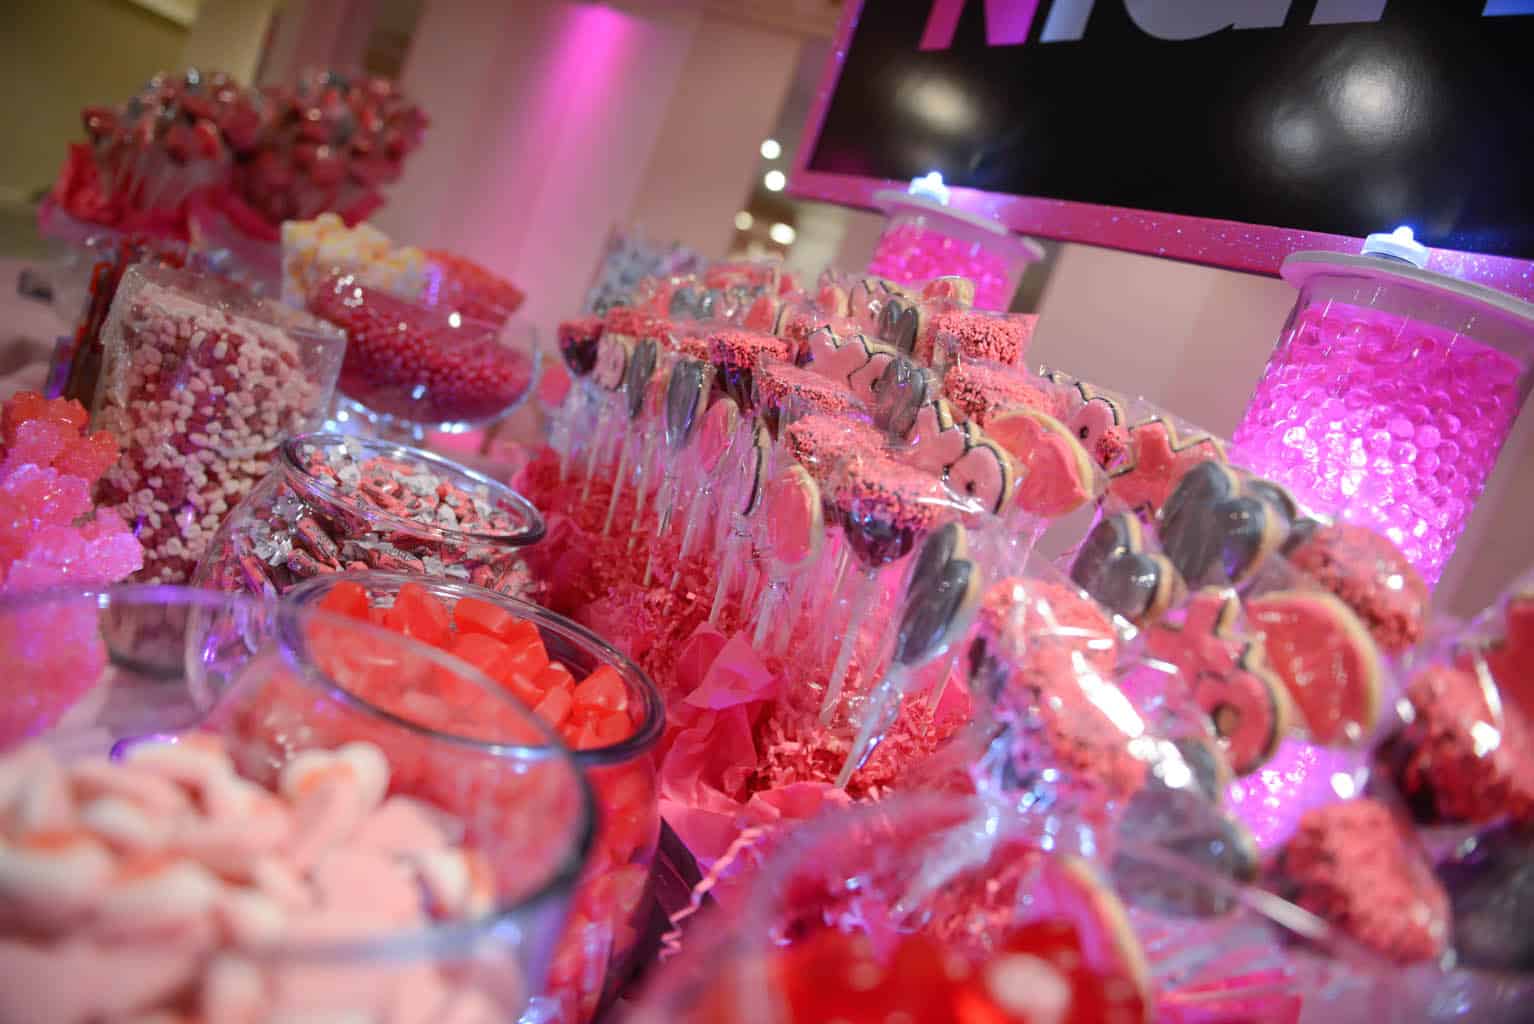 Candy Bars Gallery · Party & Event Decor · Balloon Artistry